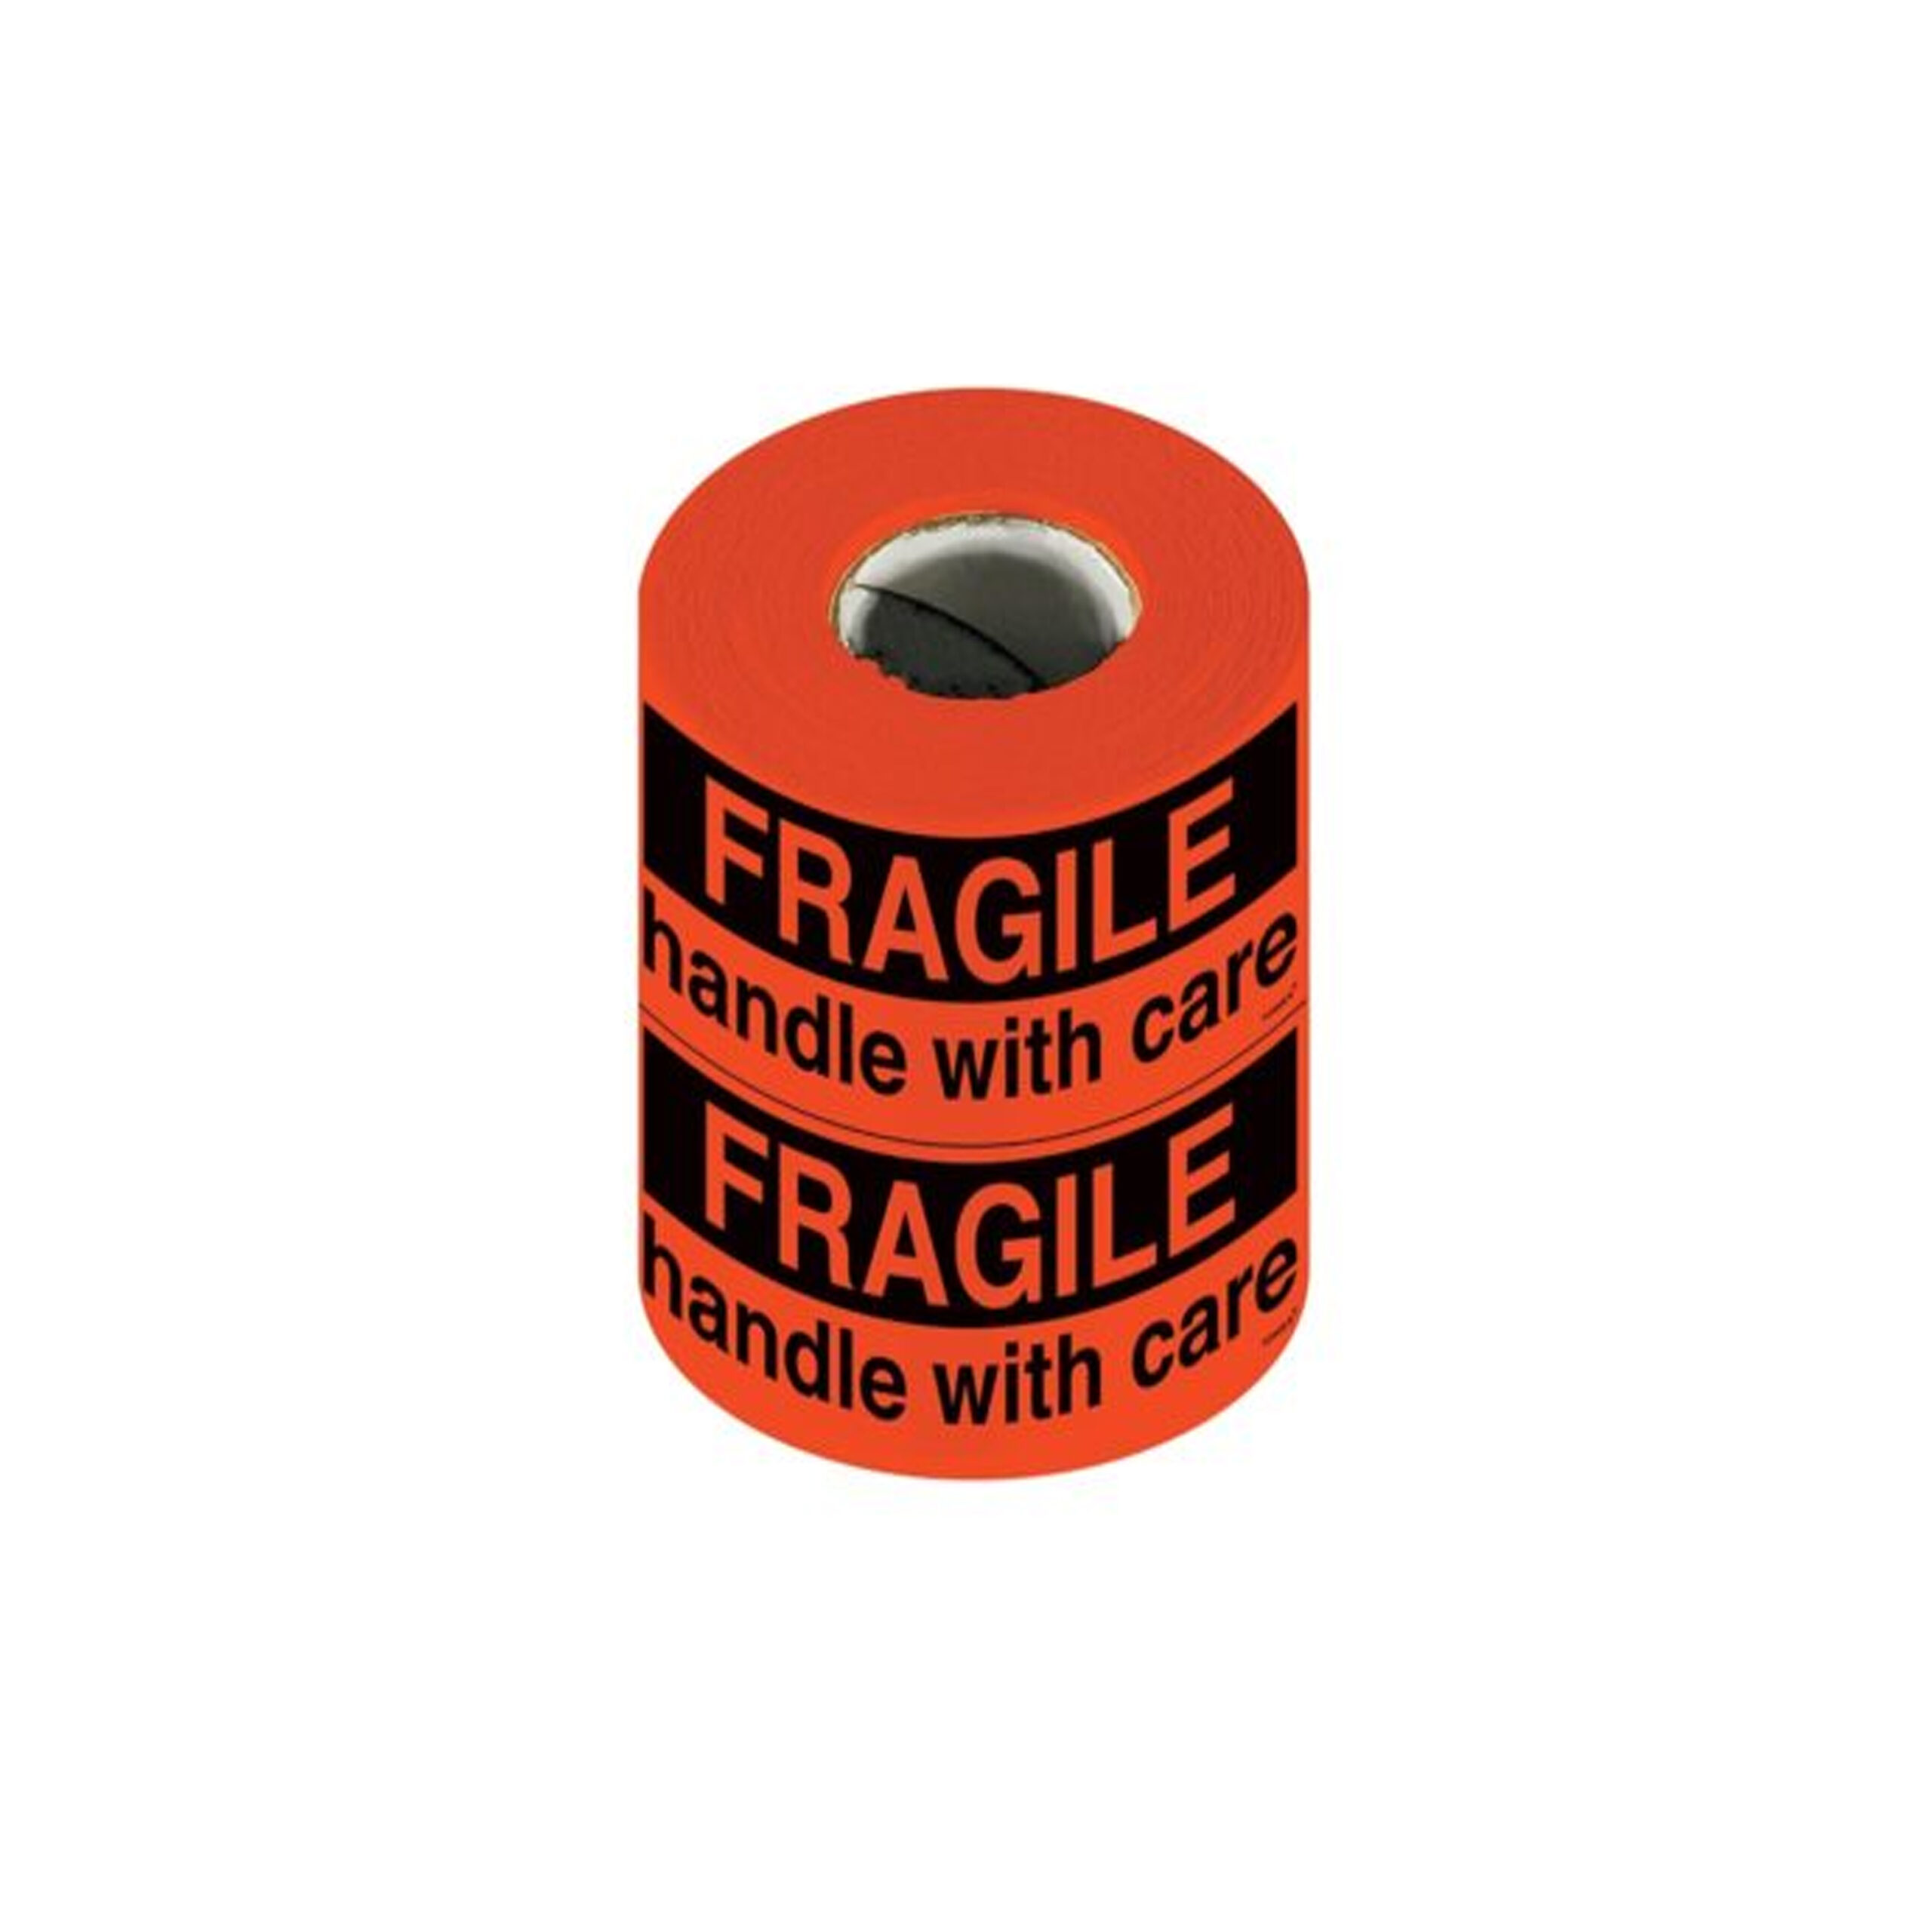 TOWER 
FLUORESCENT
ROLL "FRAGILE" 
55x162mm  (250
LABELS)